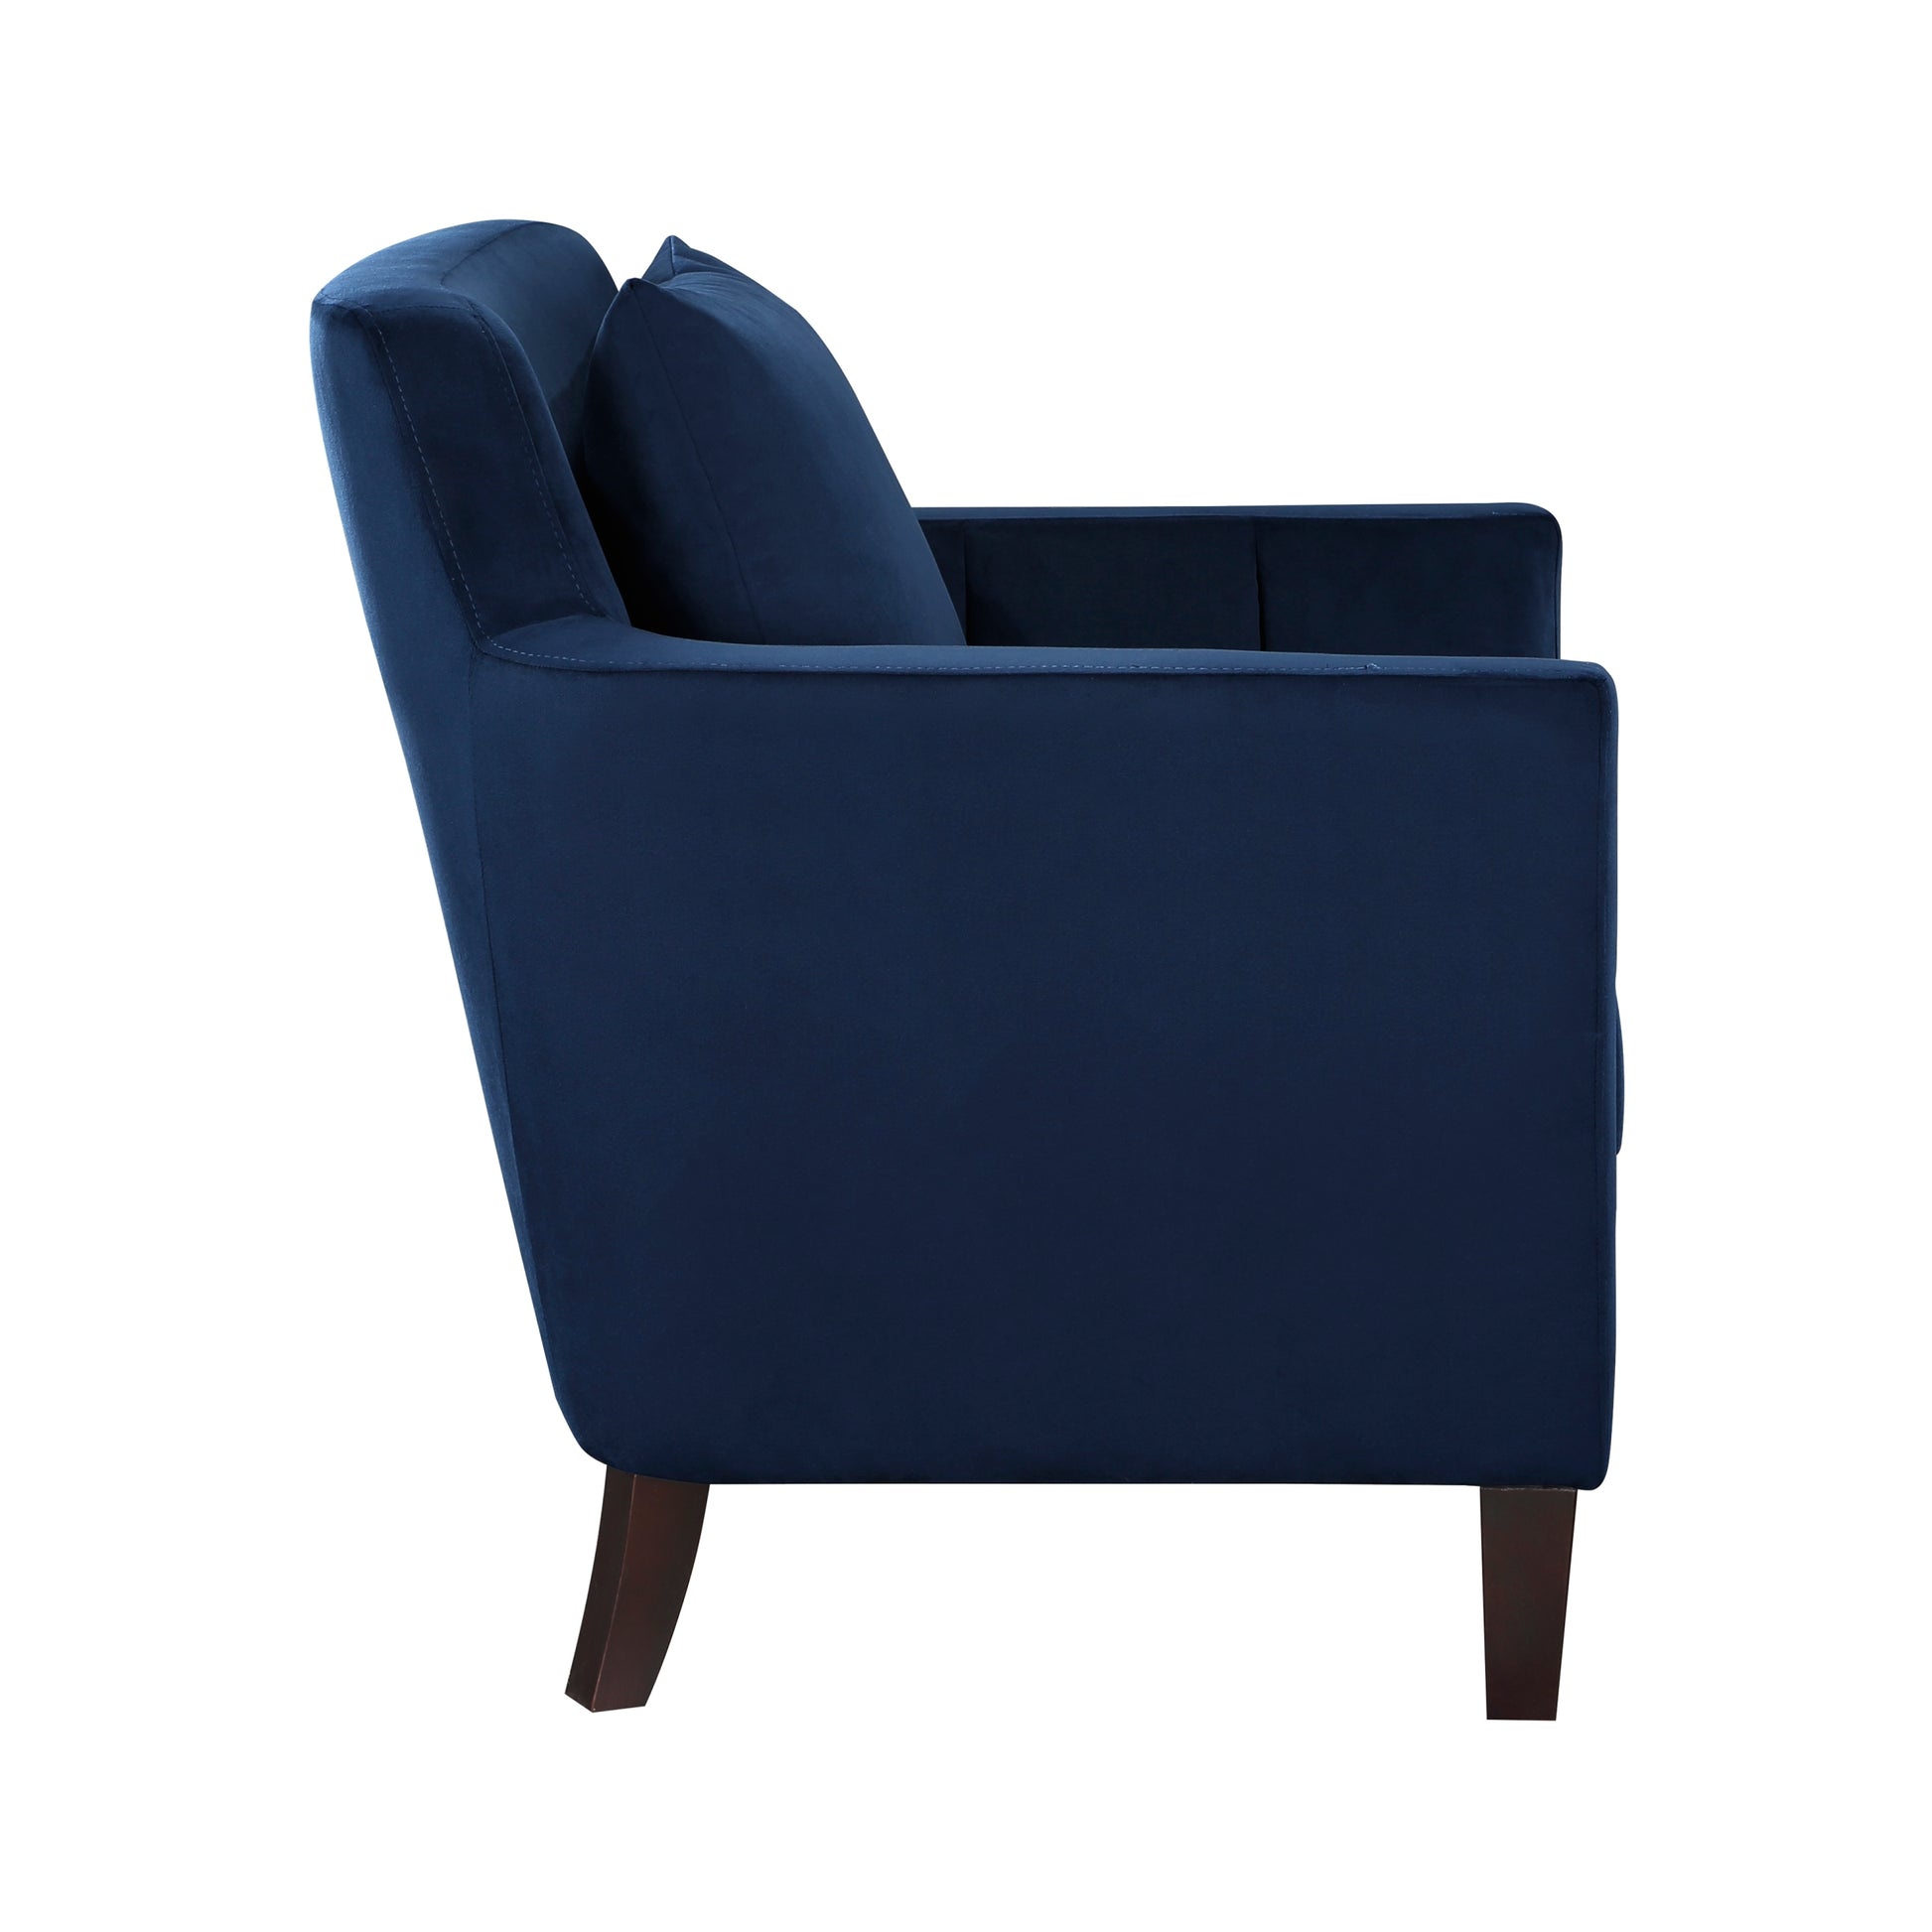 Stylish Home Accent Chair Blue Velvet Upholstery blue-primary living space-modern-solid wood